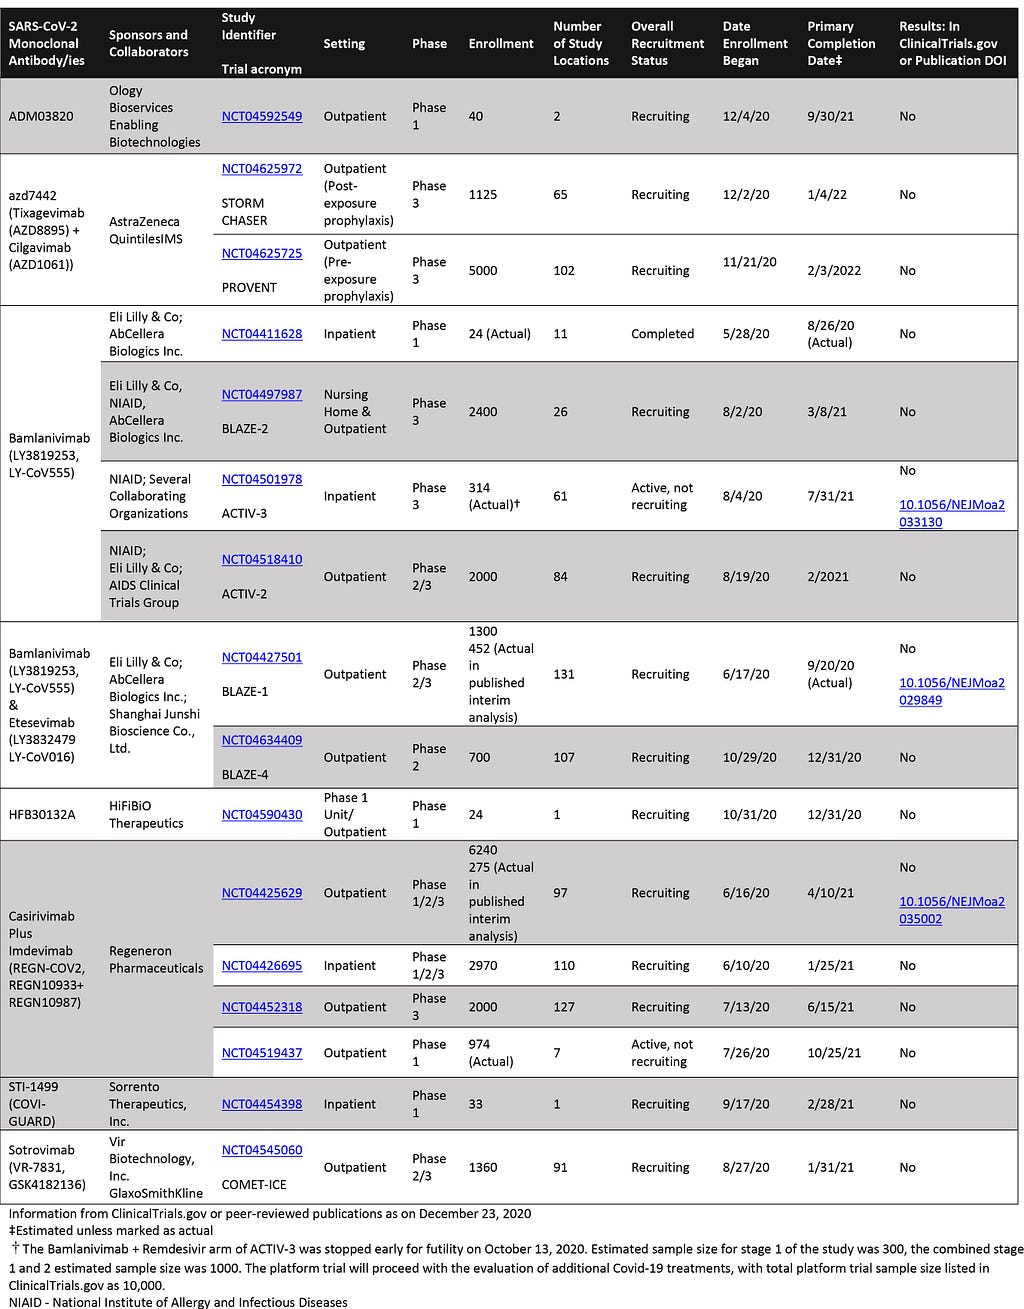 Table showing SARS-CoV2 Interventional Monoclonal Antibody Studies with >/=1 U.S. site